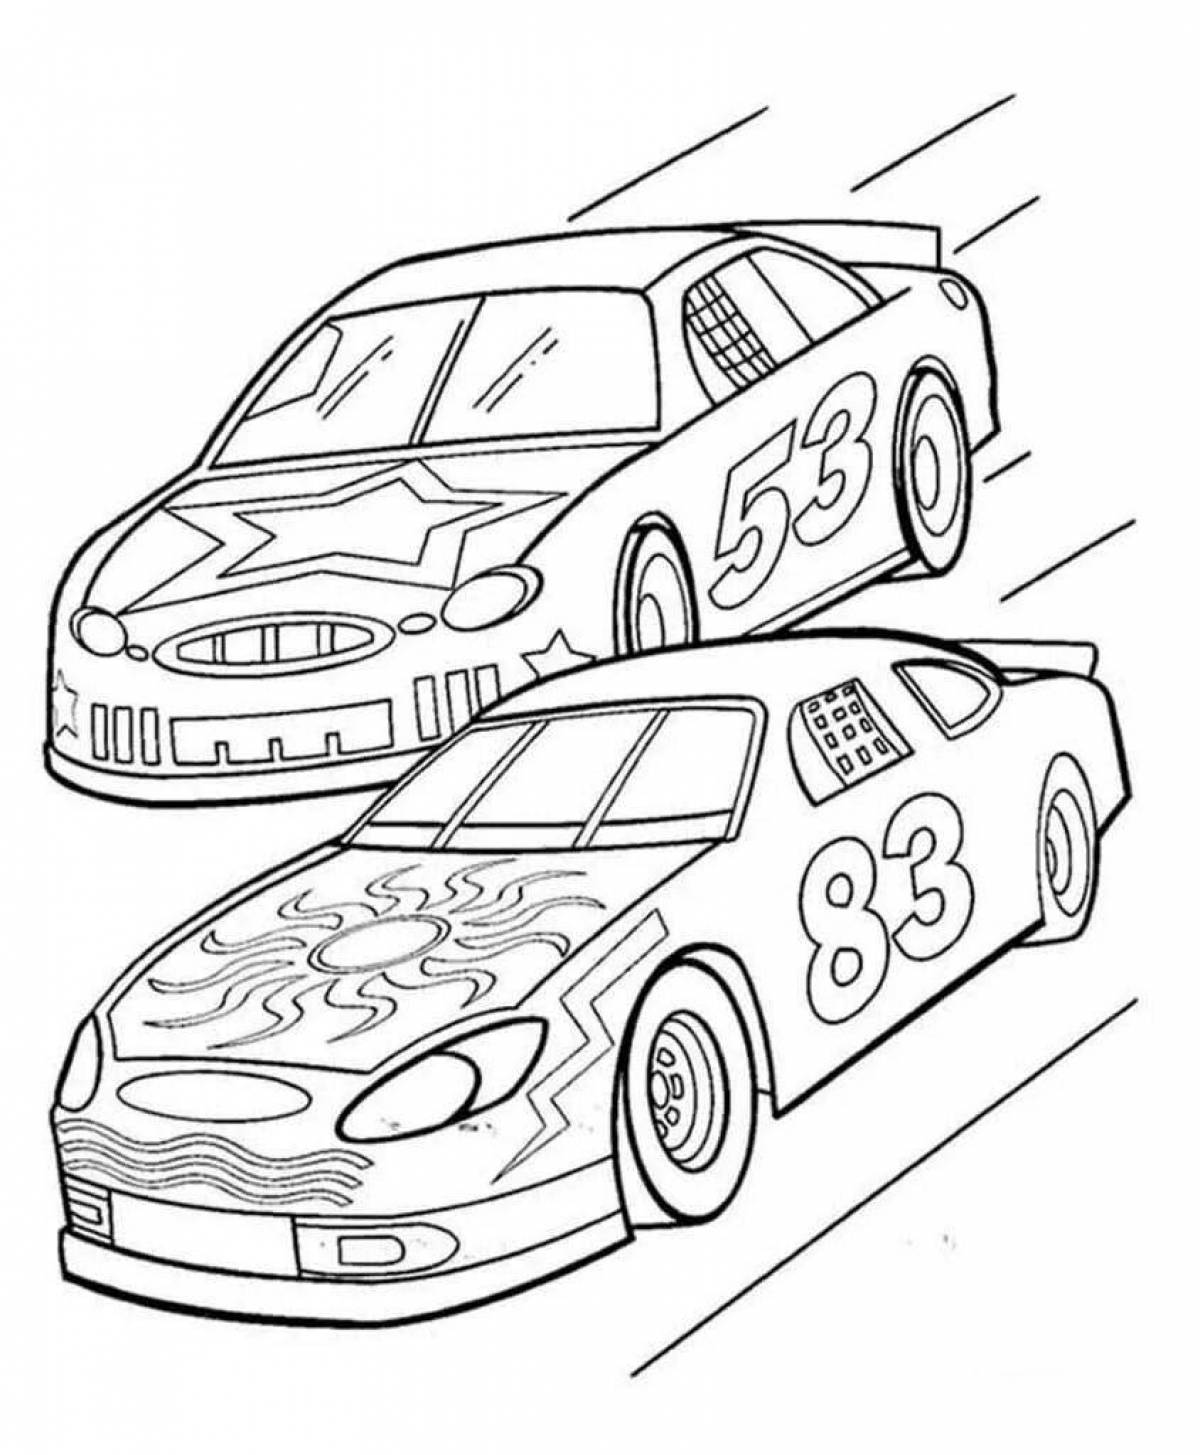 Cool cars coloring book for boys 5-6 years old